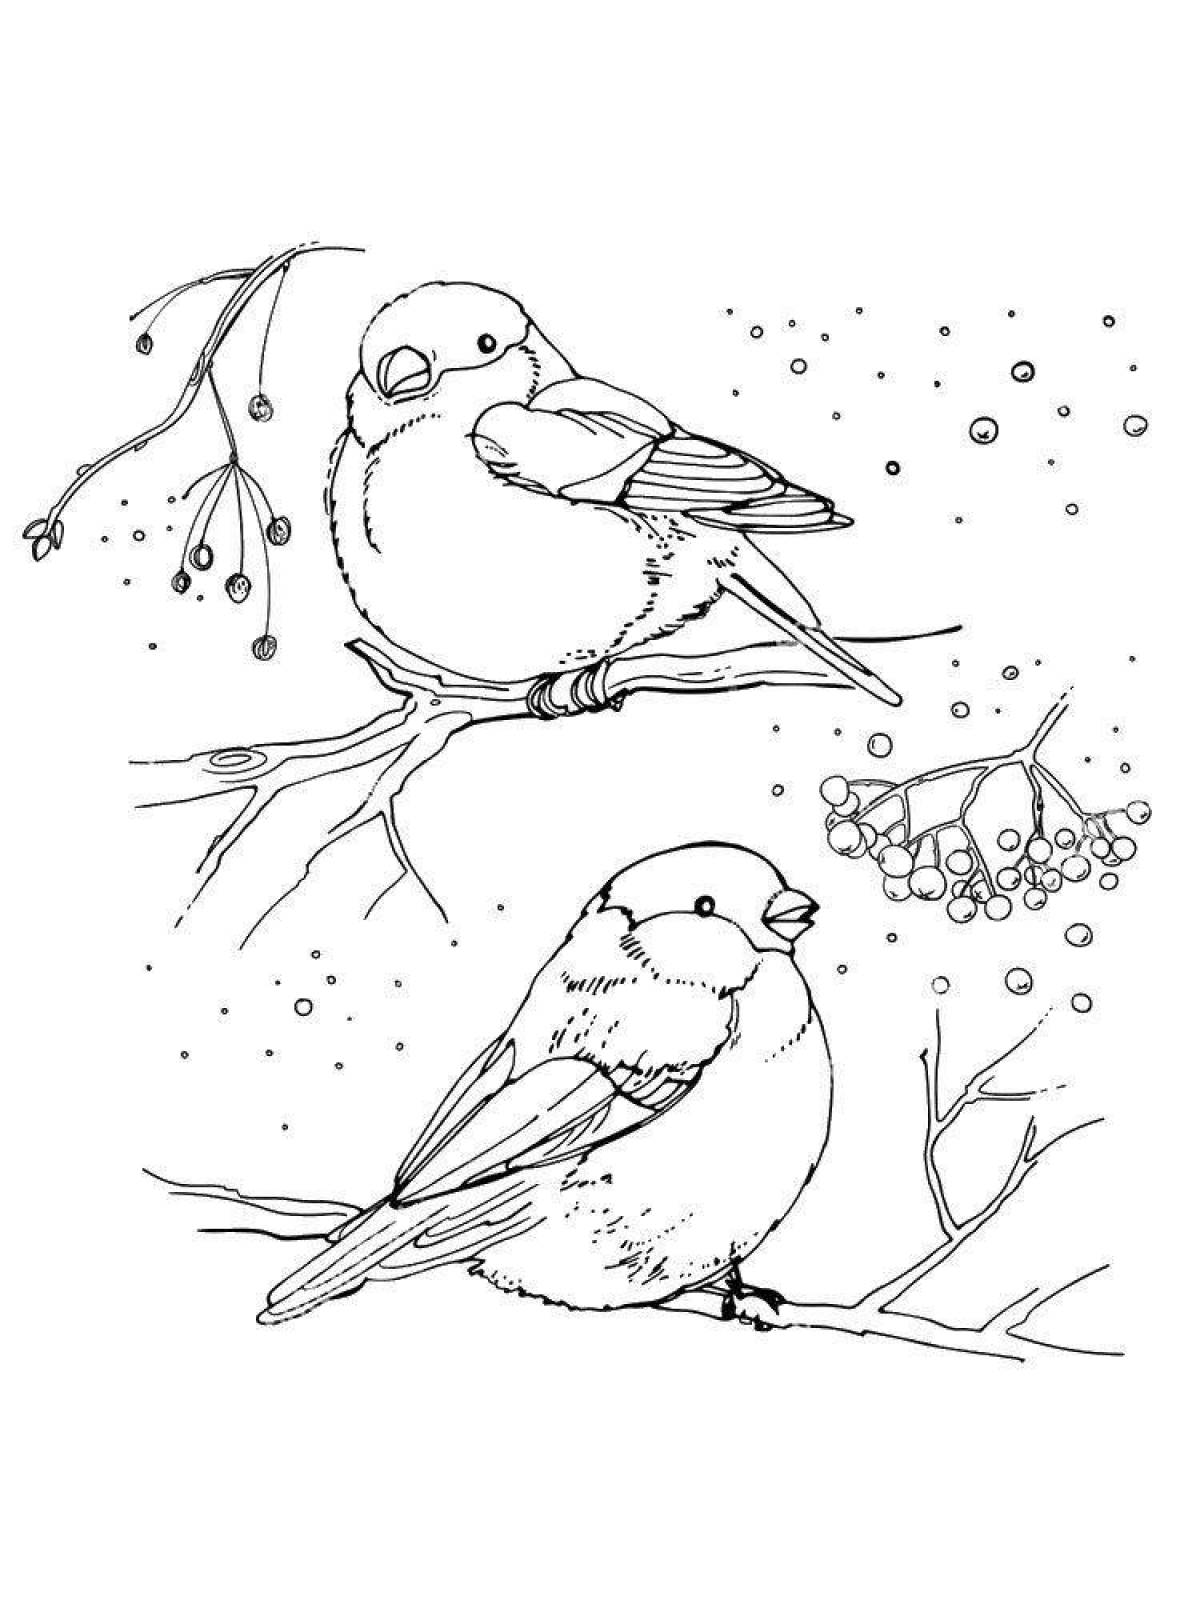 Complex drawing of a bullfinch